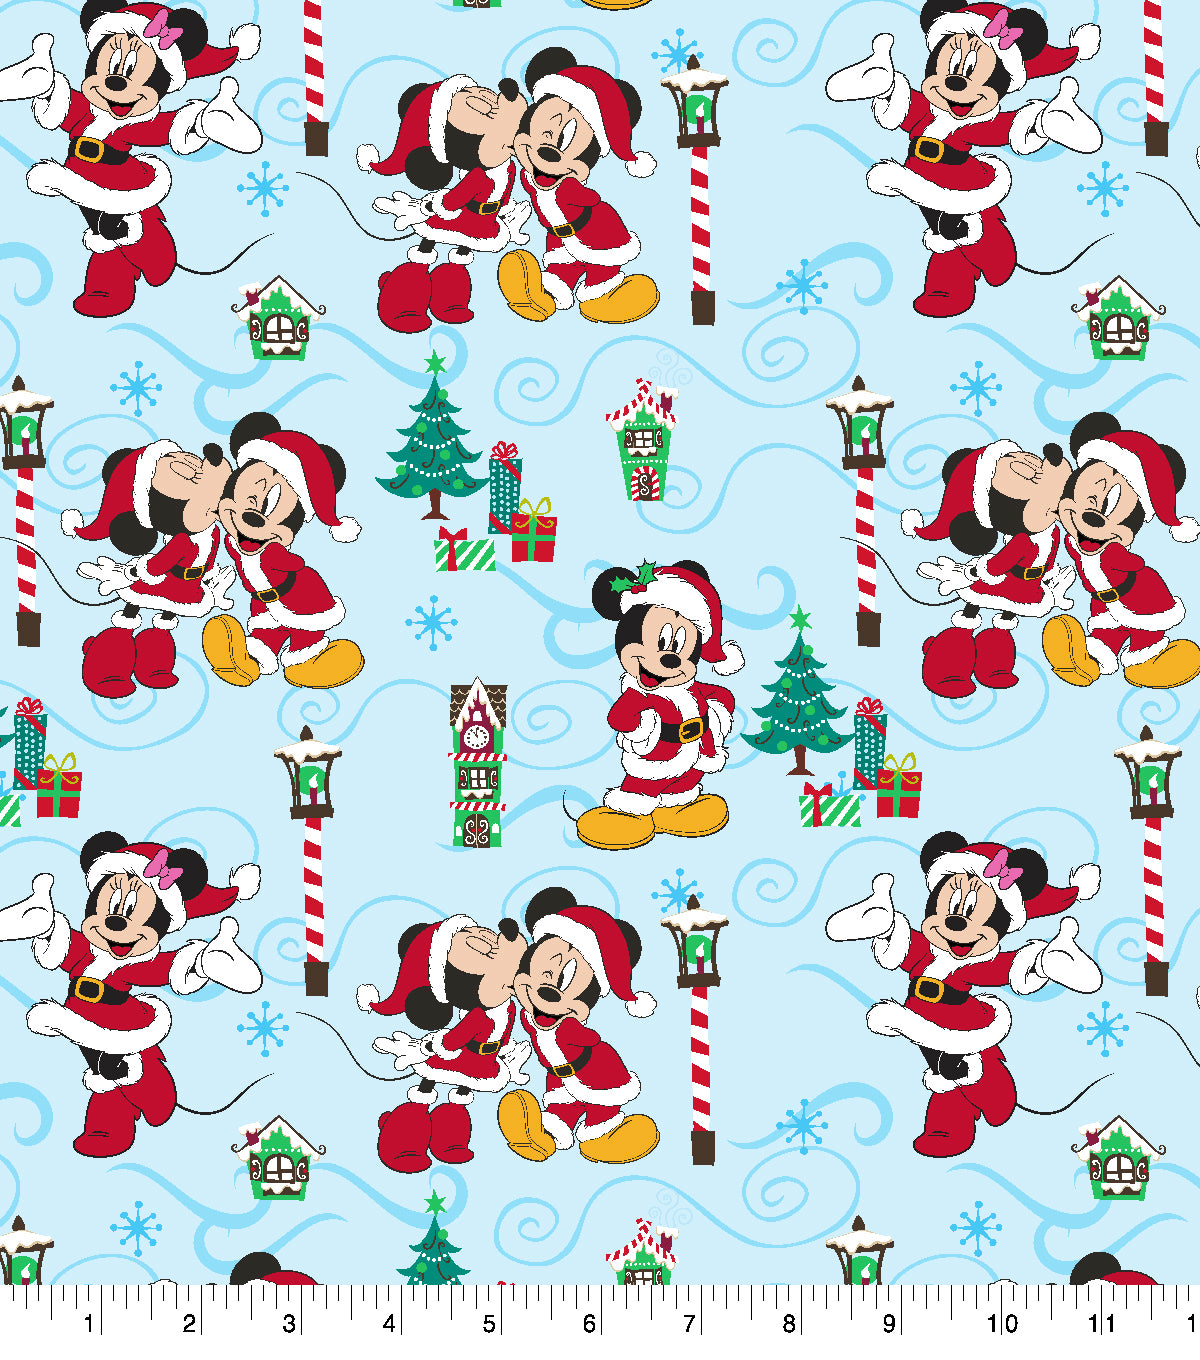 Disney Mickey Mouse & Minnie Mouse Christmas Love Fabric